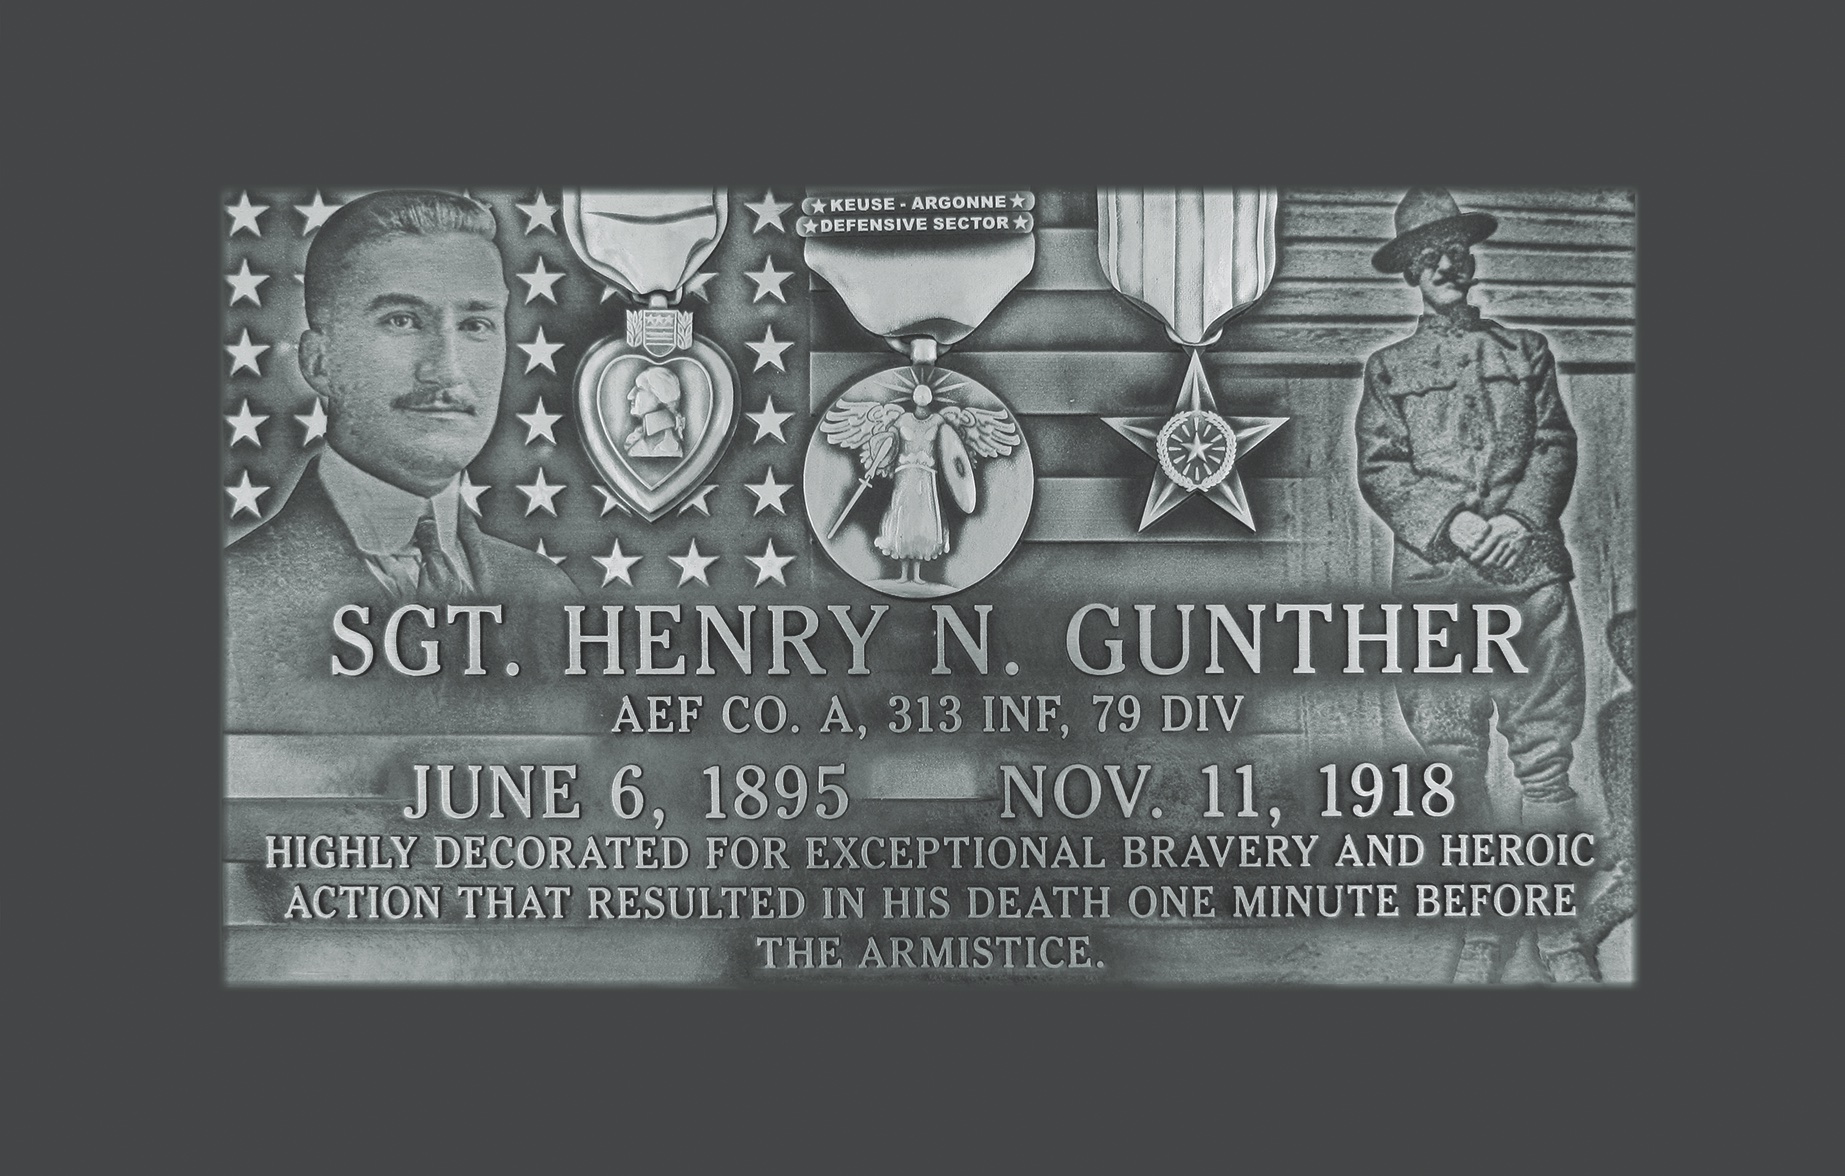 The plaque commemorating Sergeant Henry N. Gunther at a Baltimore cemetery. (Concord, CC BY-SA 3.0)